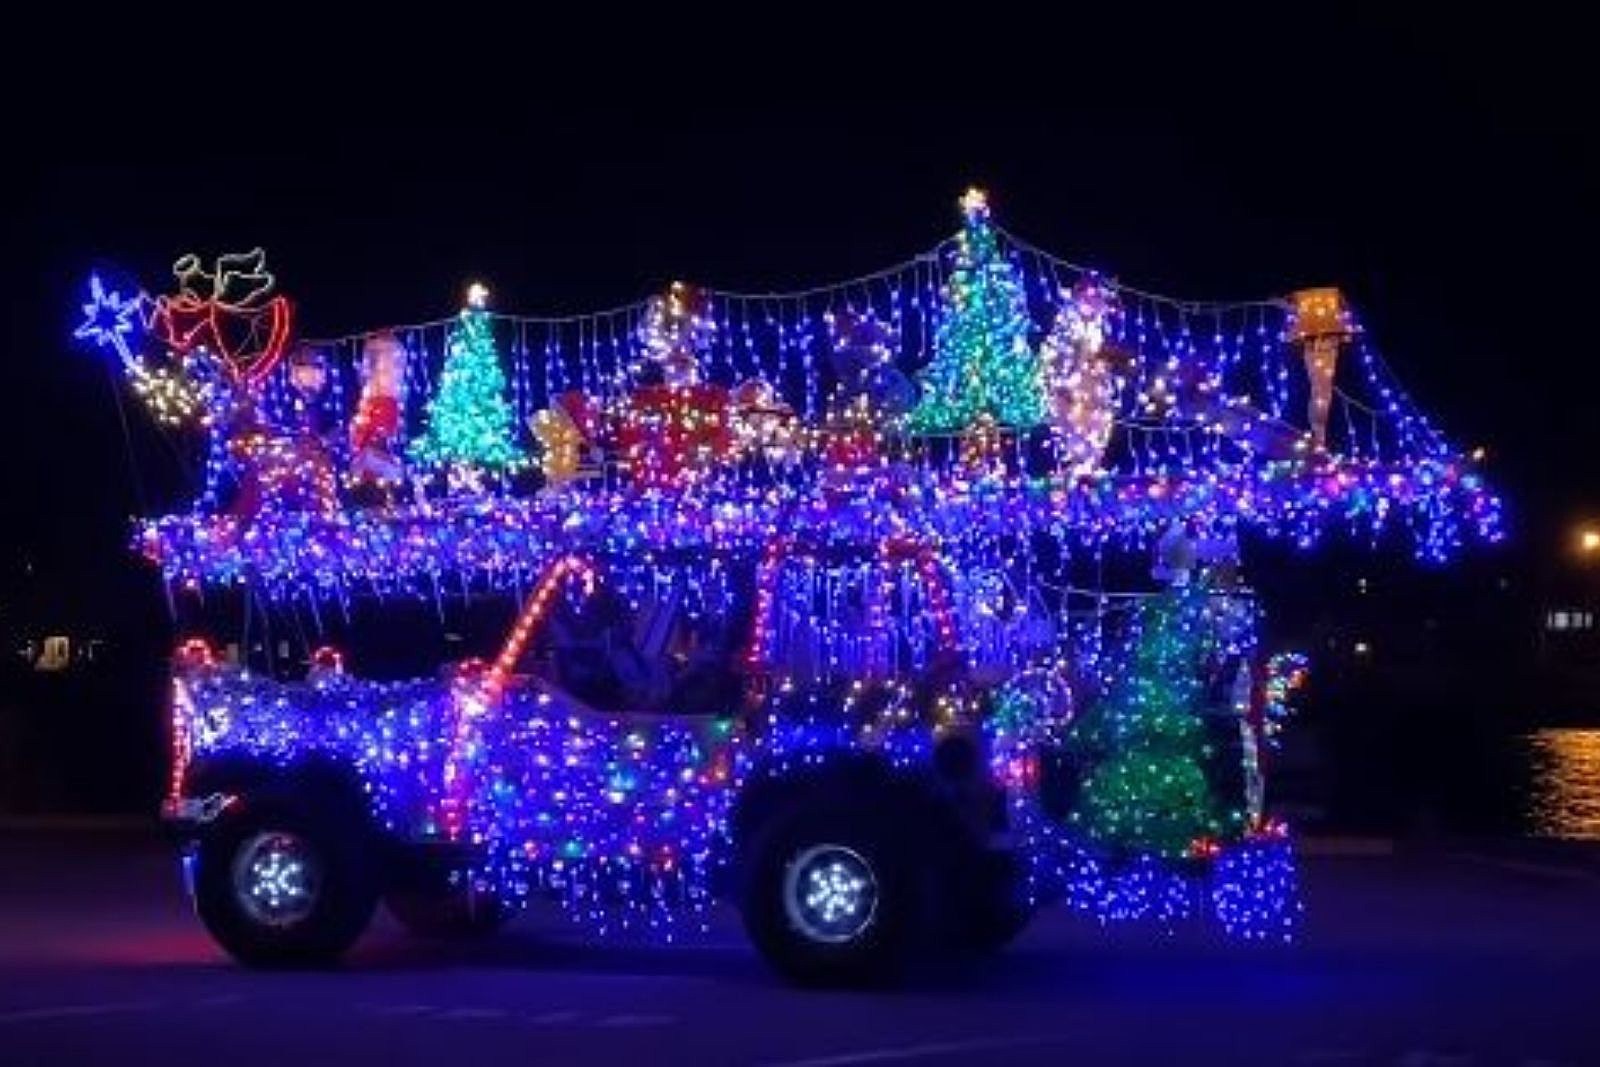 New Jersey Jeep Takes Epic Christmas Lights Display for a Ride